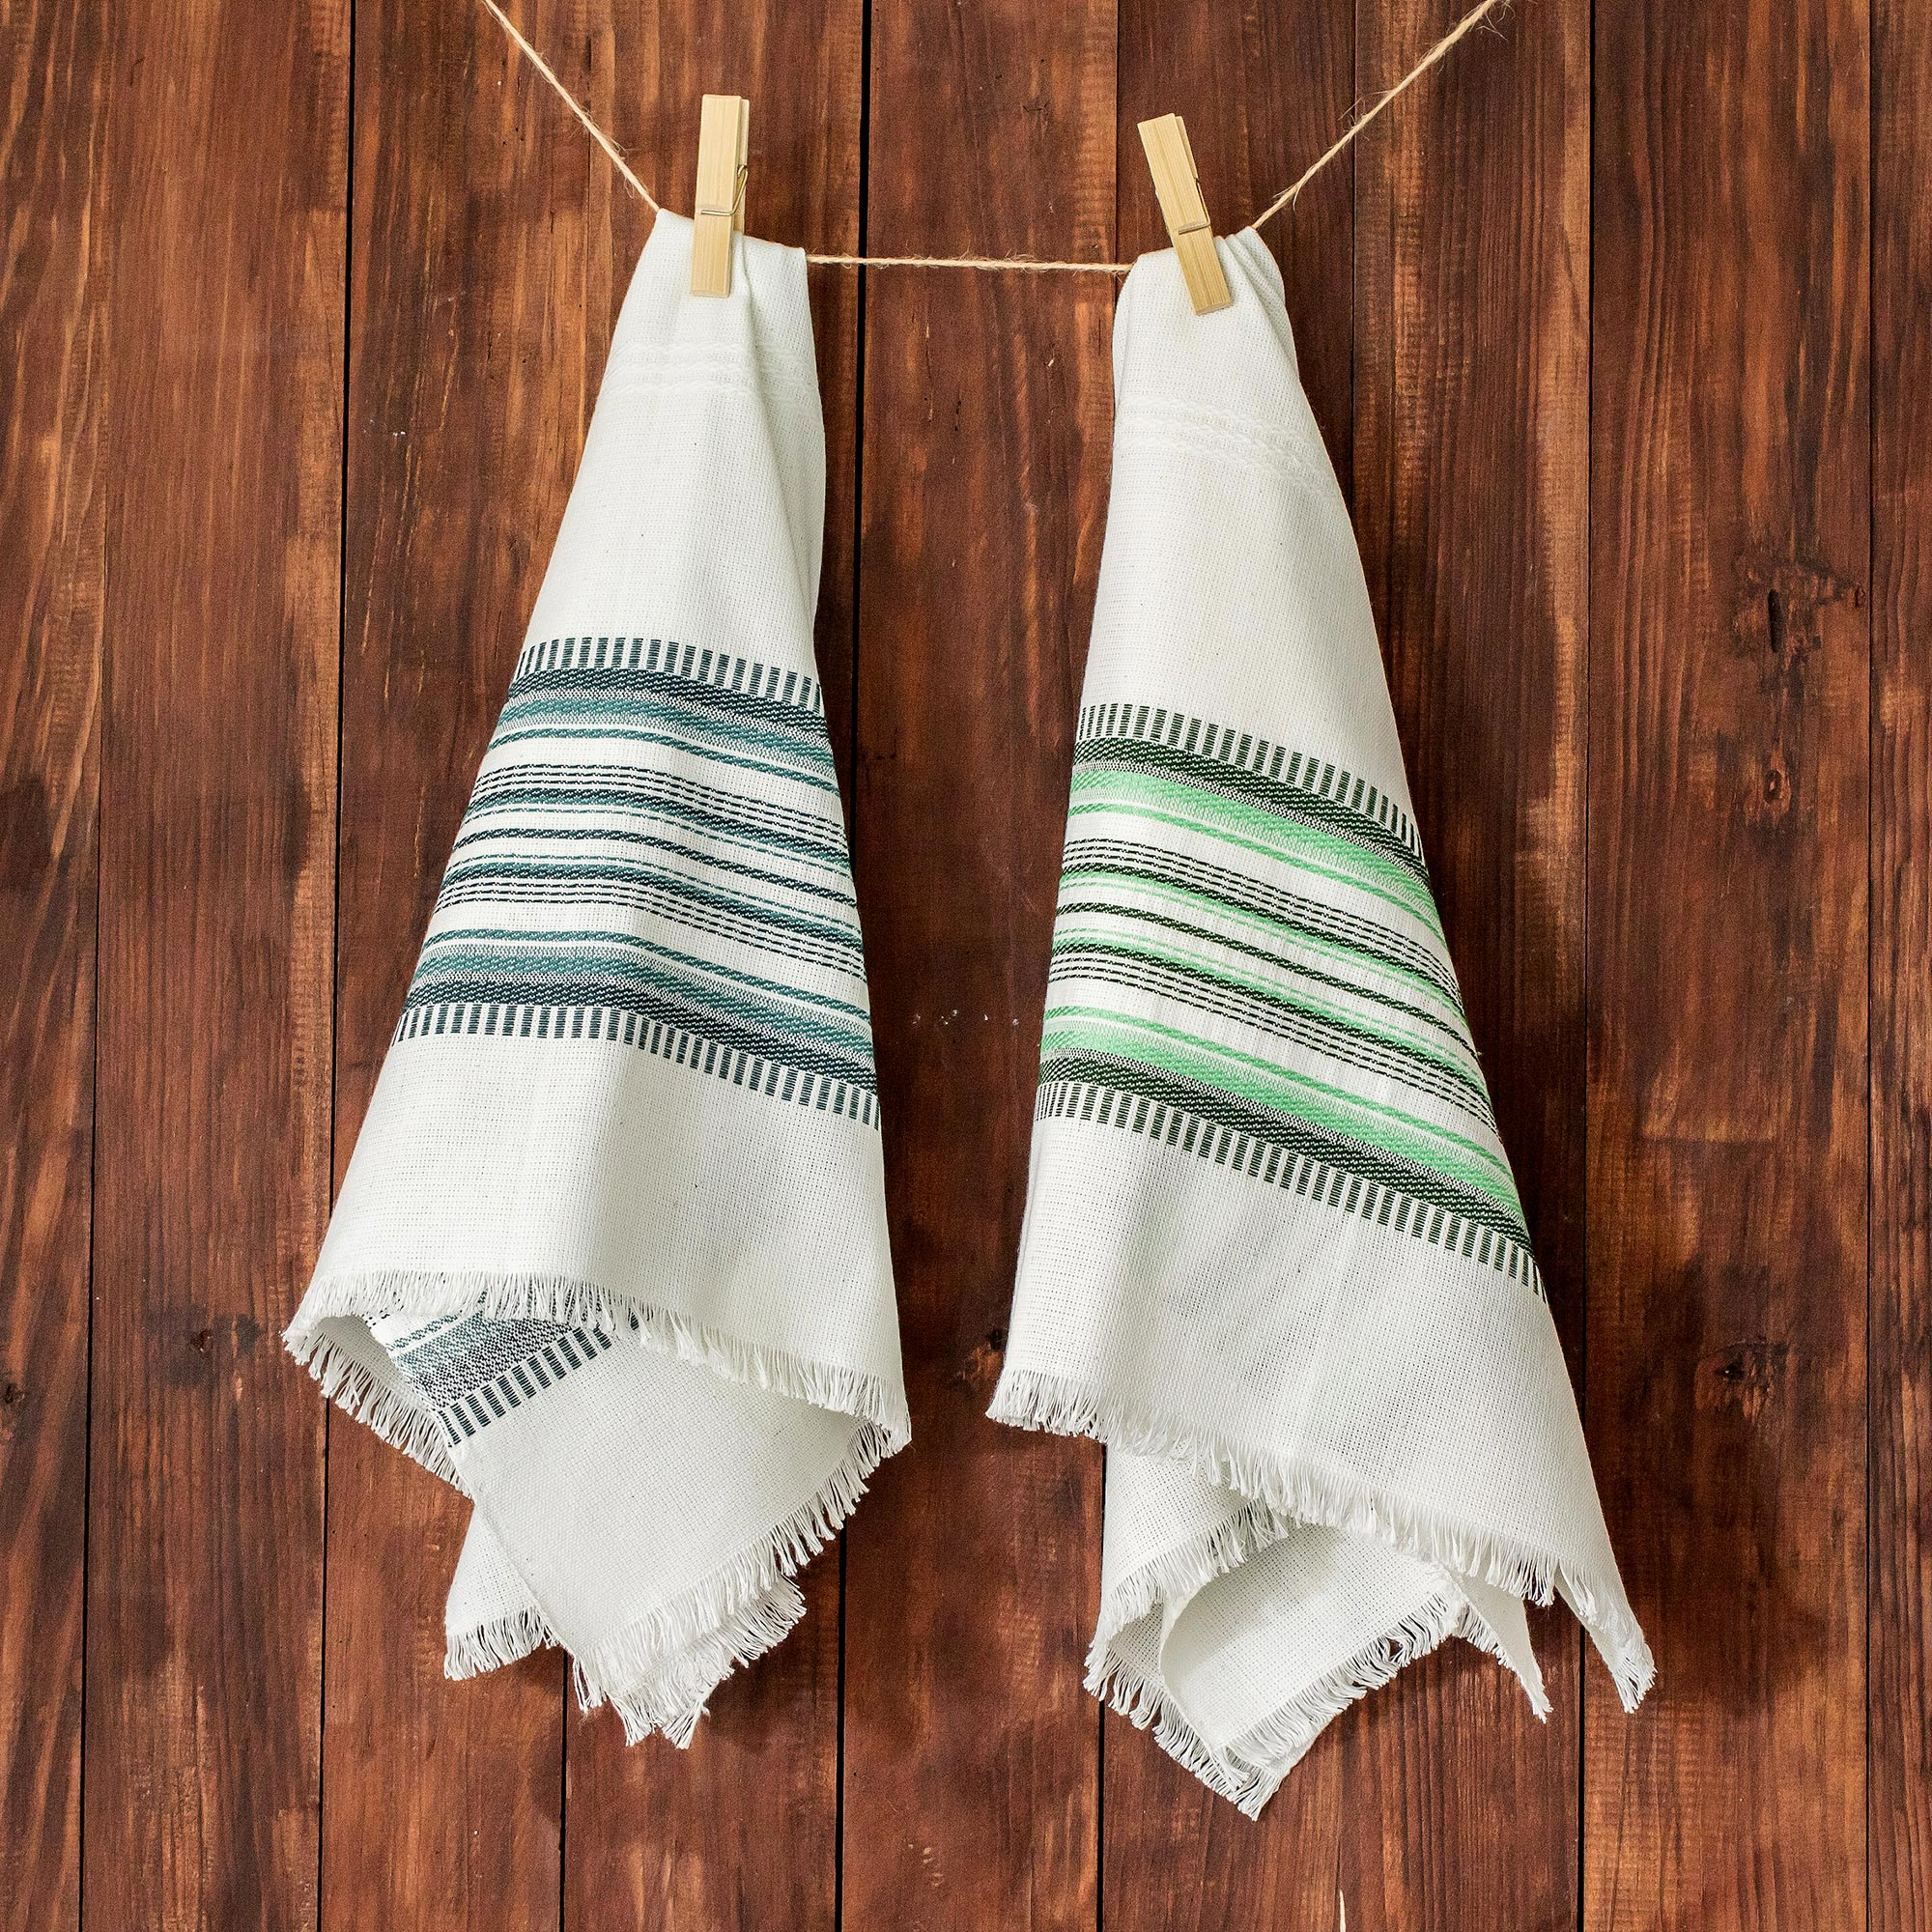 Two Handwoven Guatemalan White and Green Cotton Dish Towels, 'Forest Colors